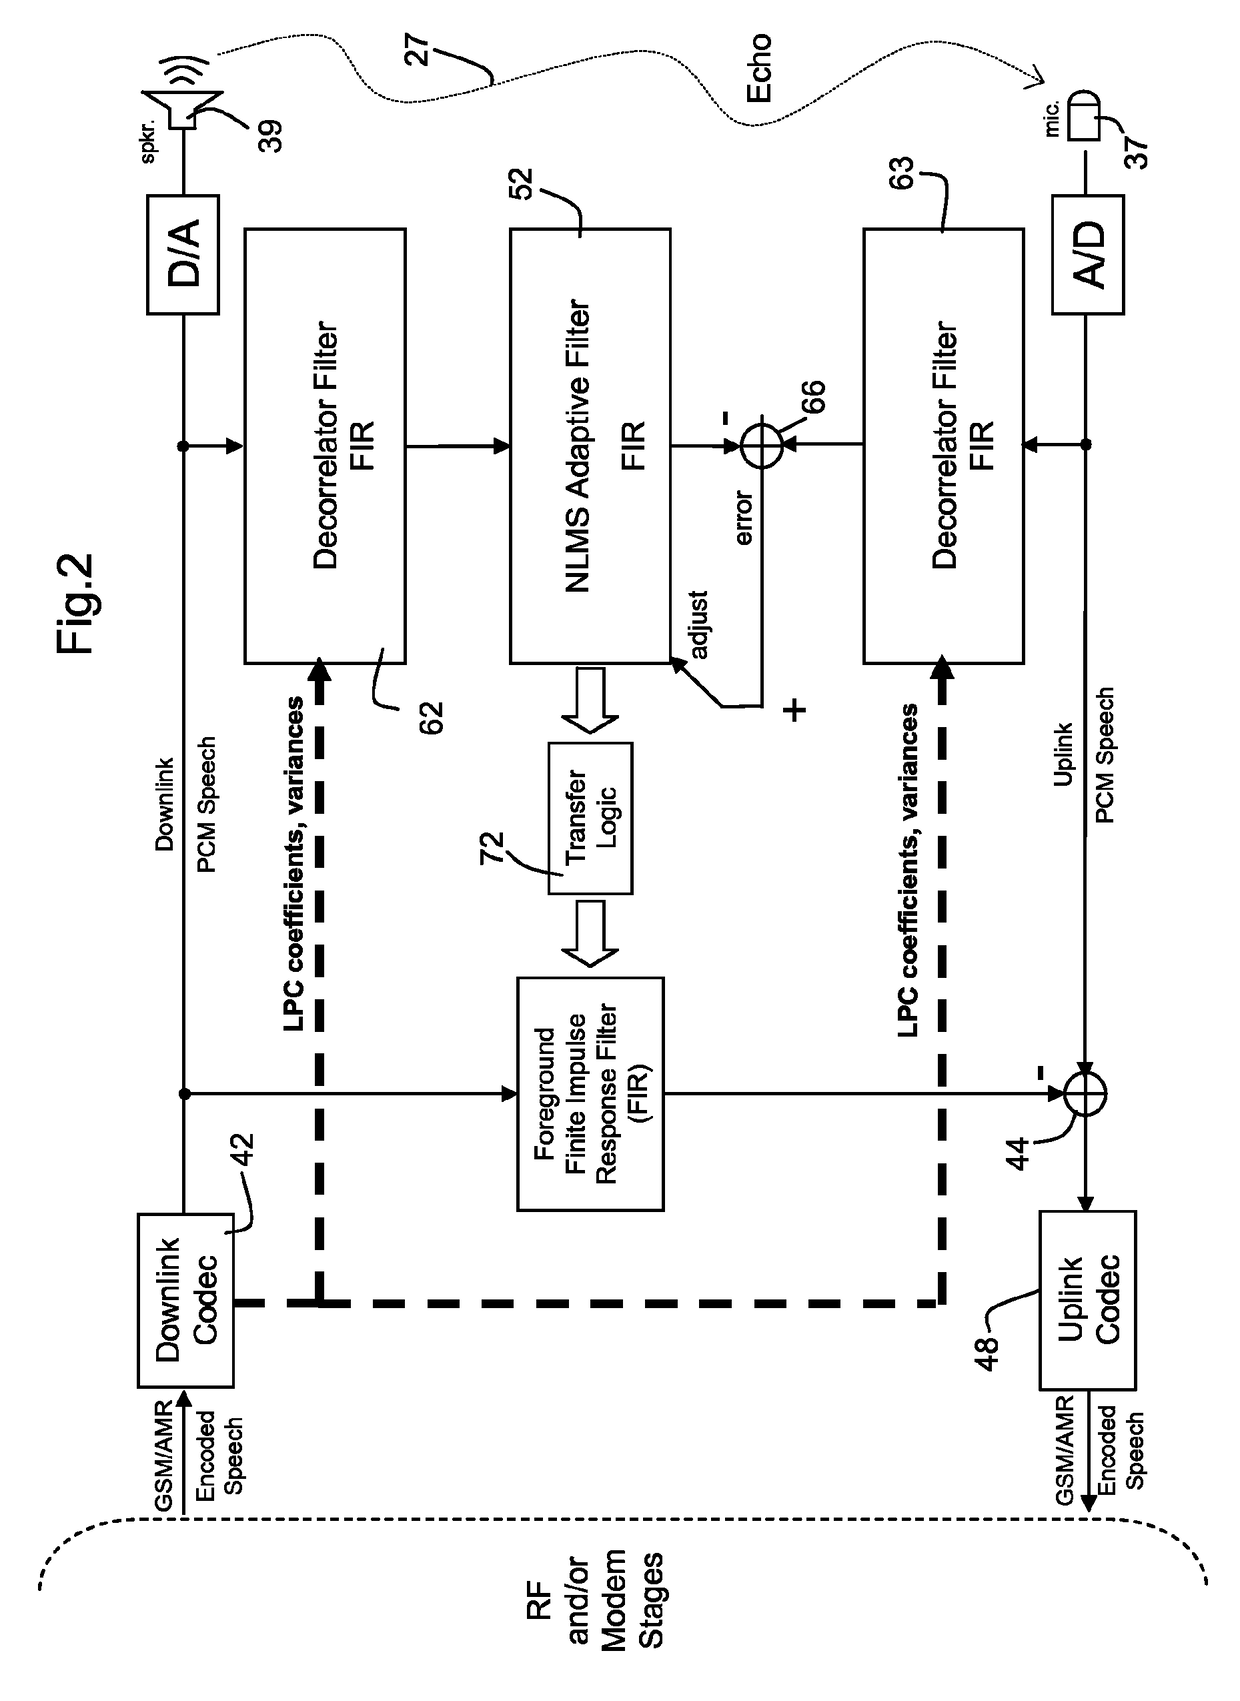 Echo canceller with correlation using pre-whitened data values received by downlink codec